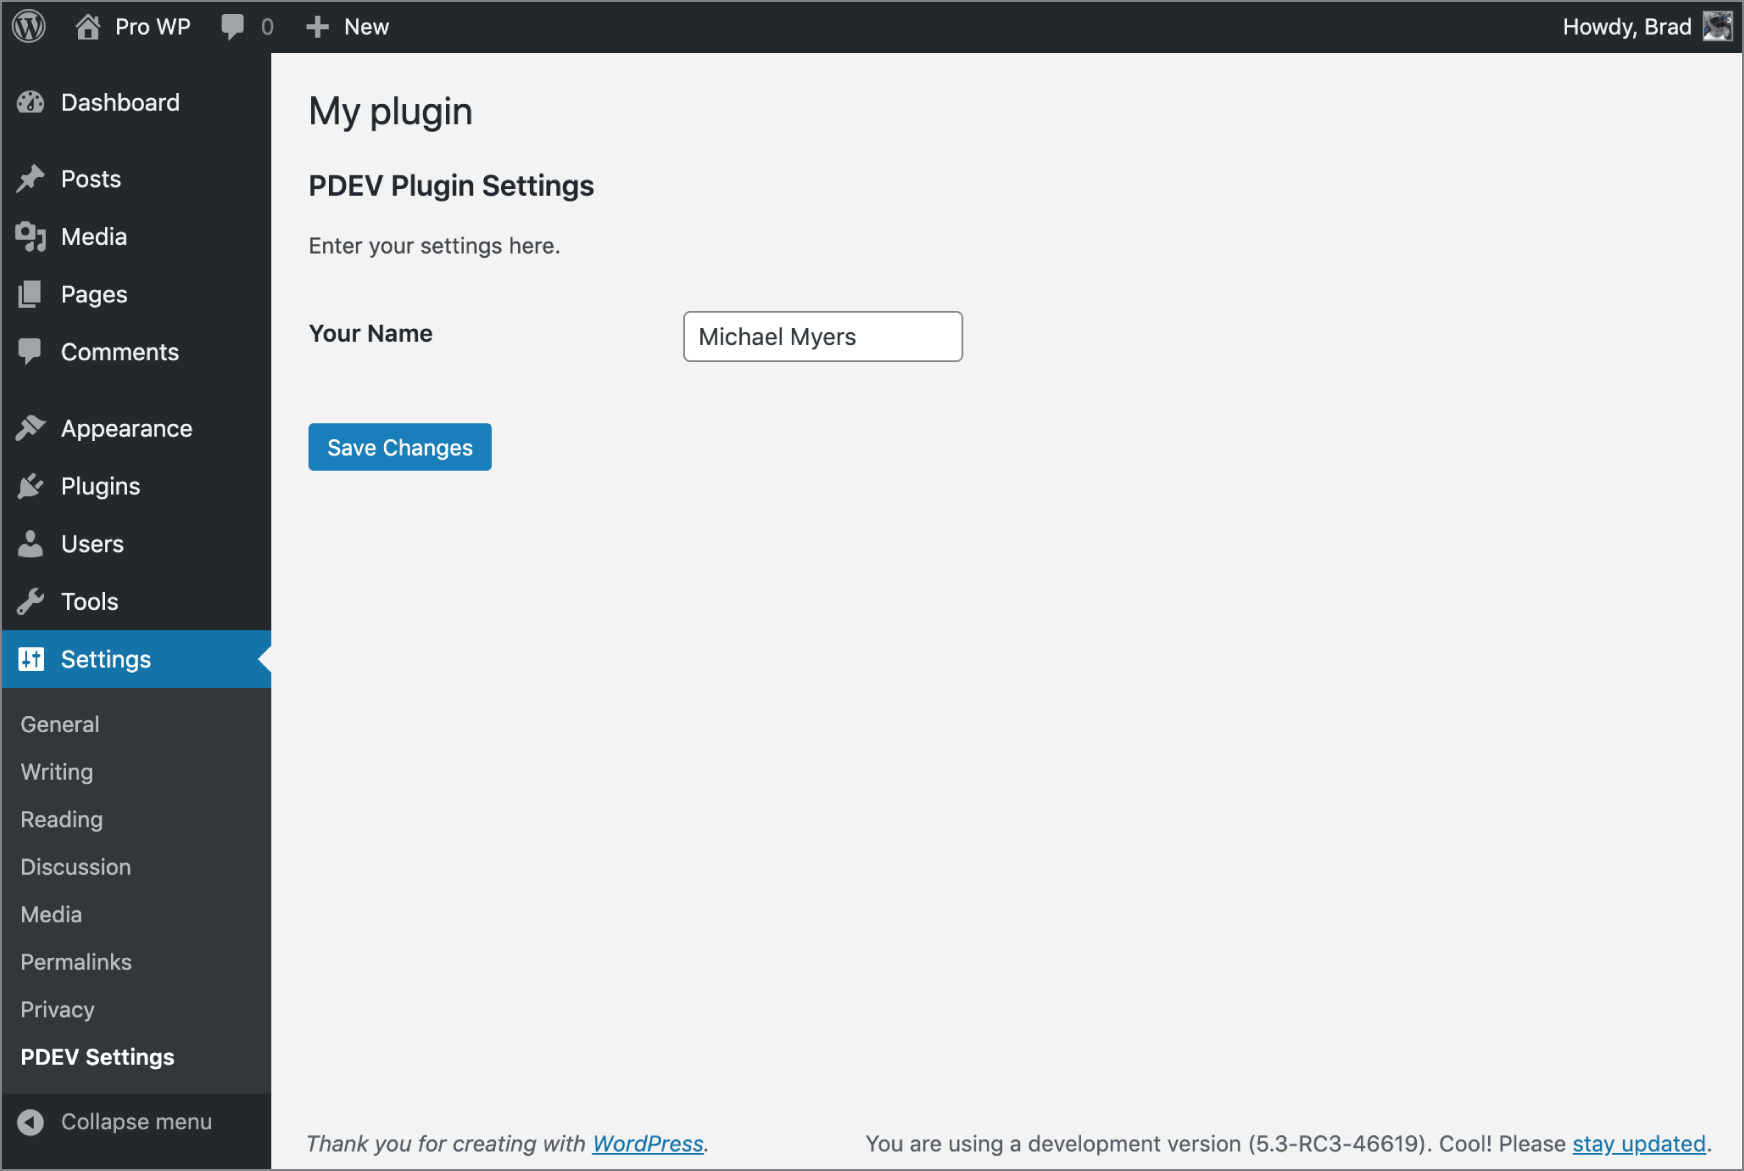 Screenshot of the Plugin management page displaying the PDEV Plugin Settings to enter your name in the box and save changes.